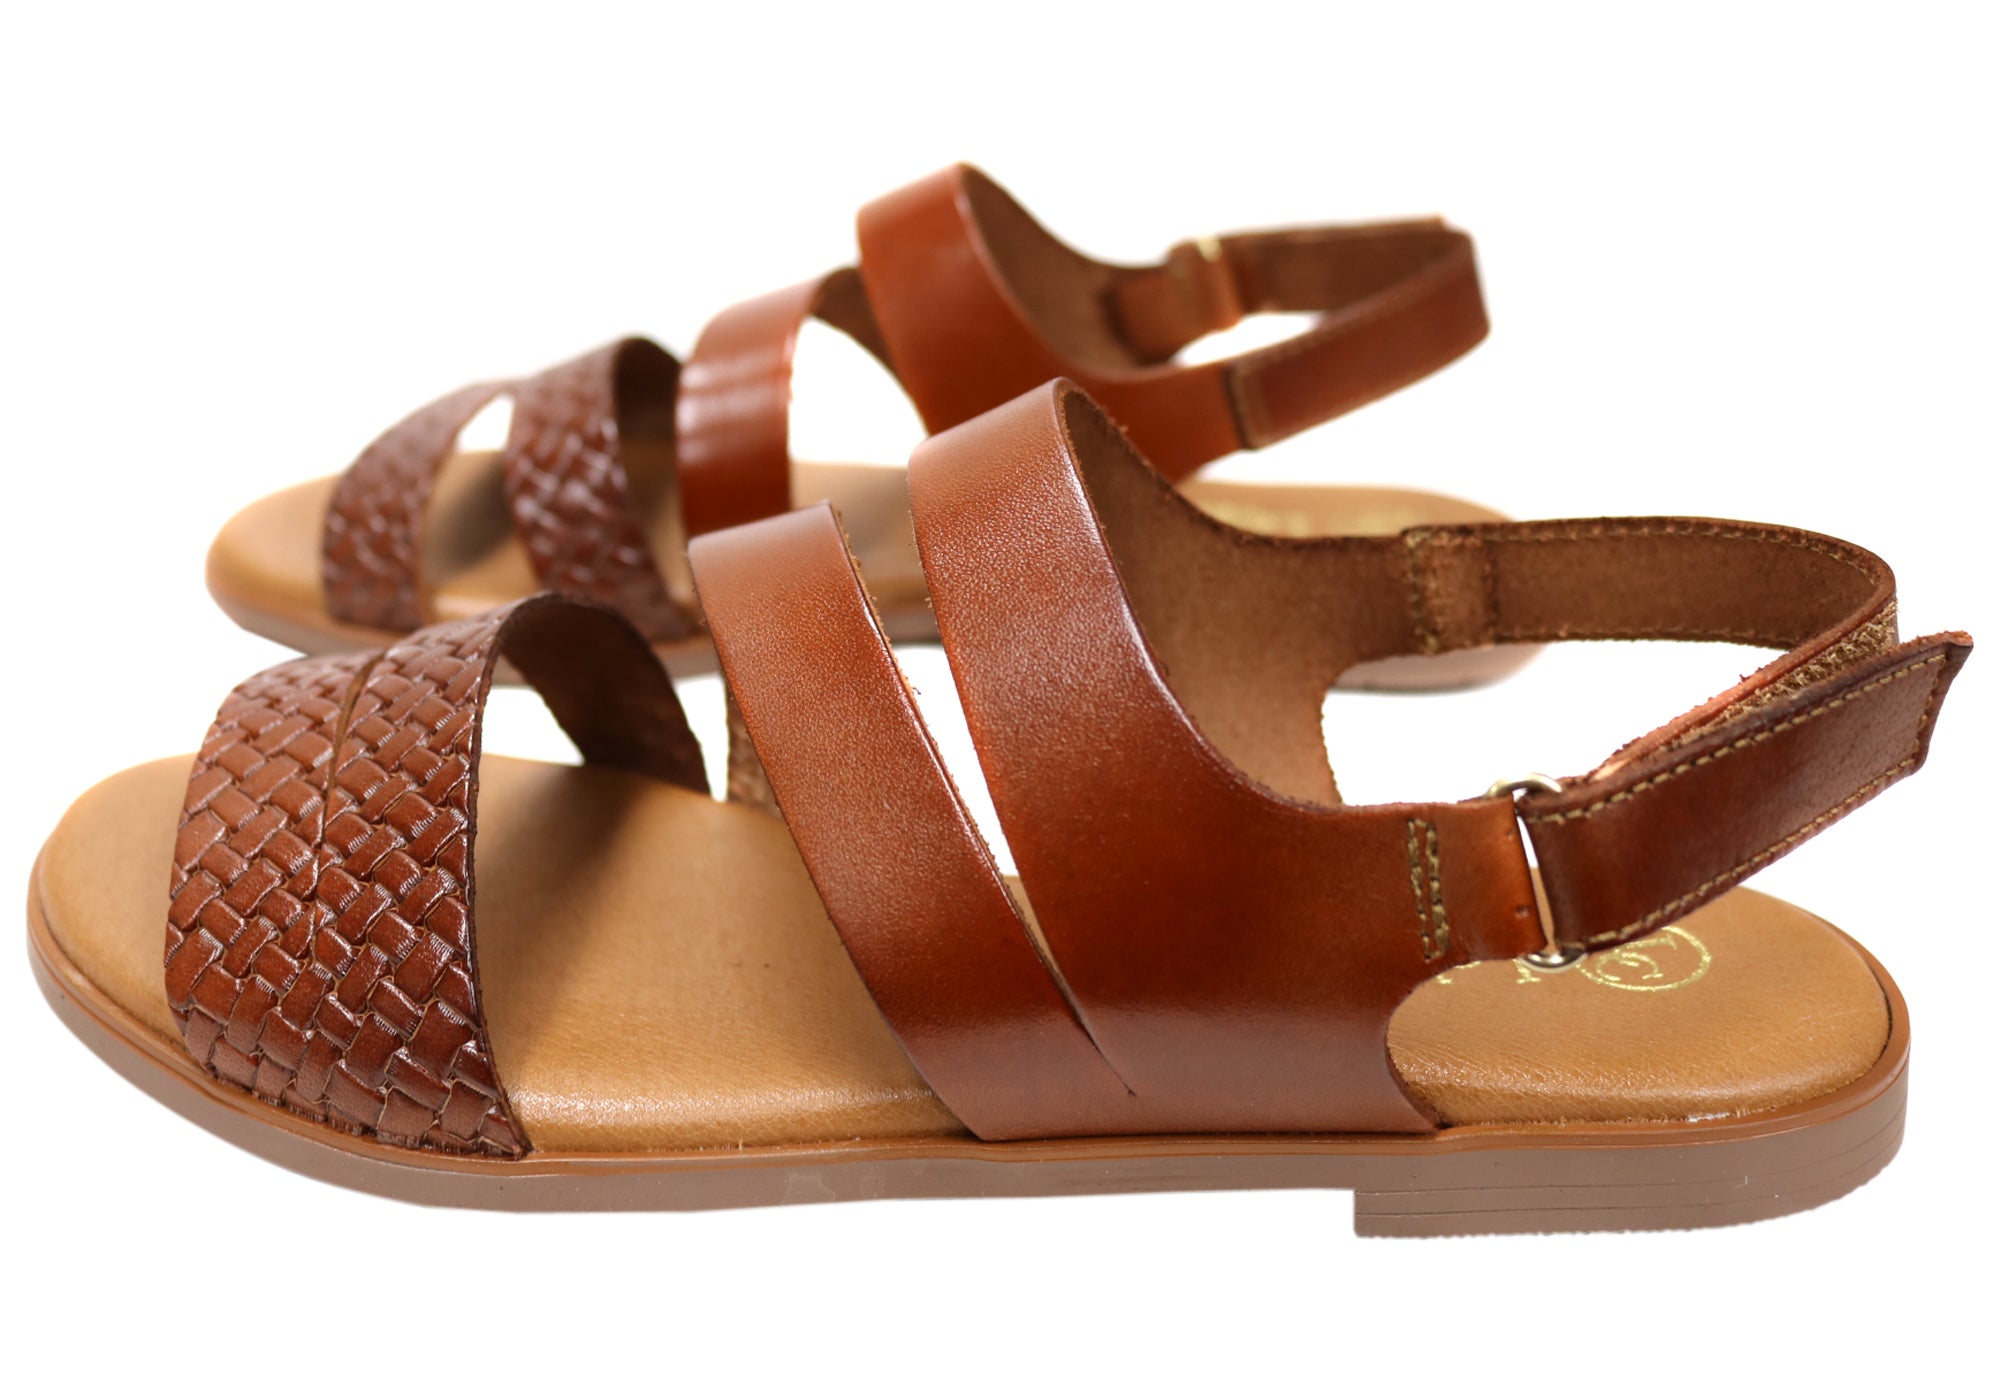 Lola Canales Winkle Womens Comfortable Leather Sandals Made In Spain